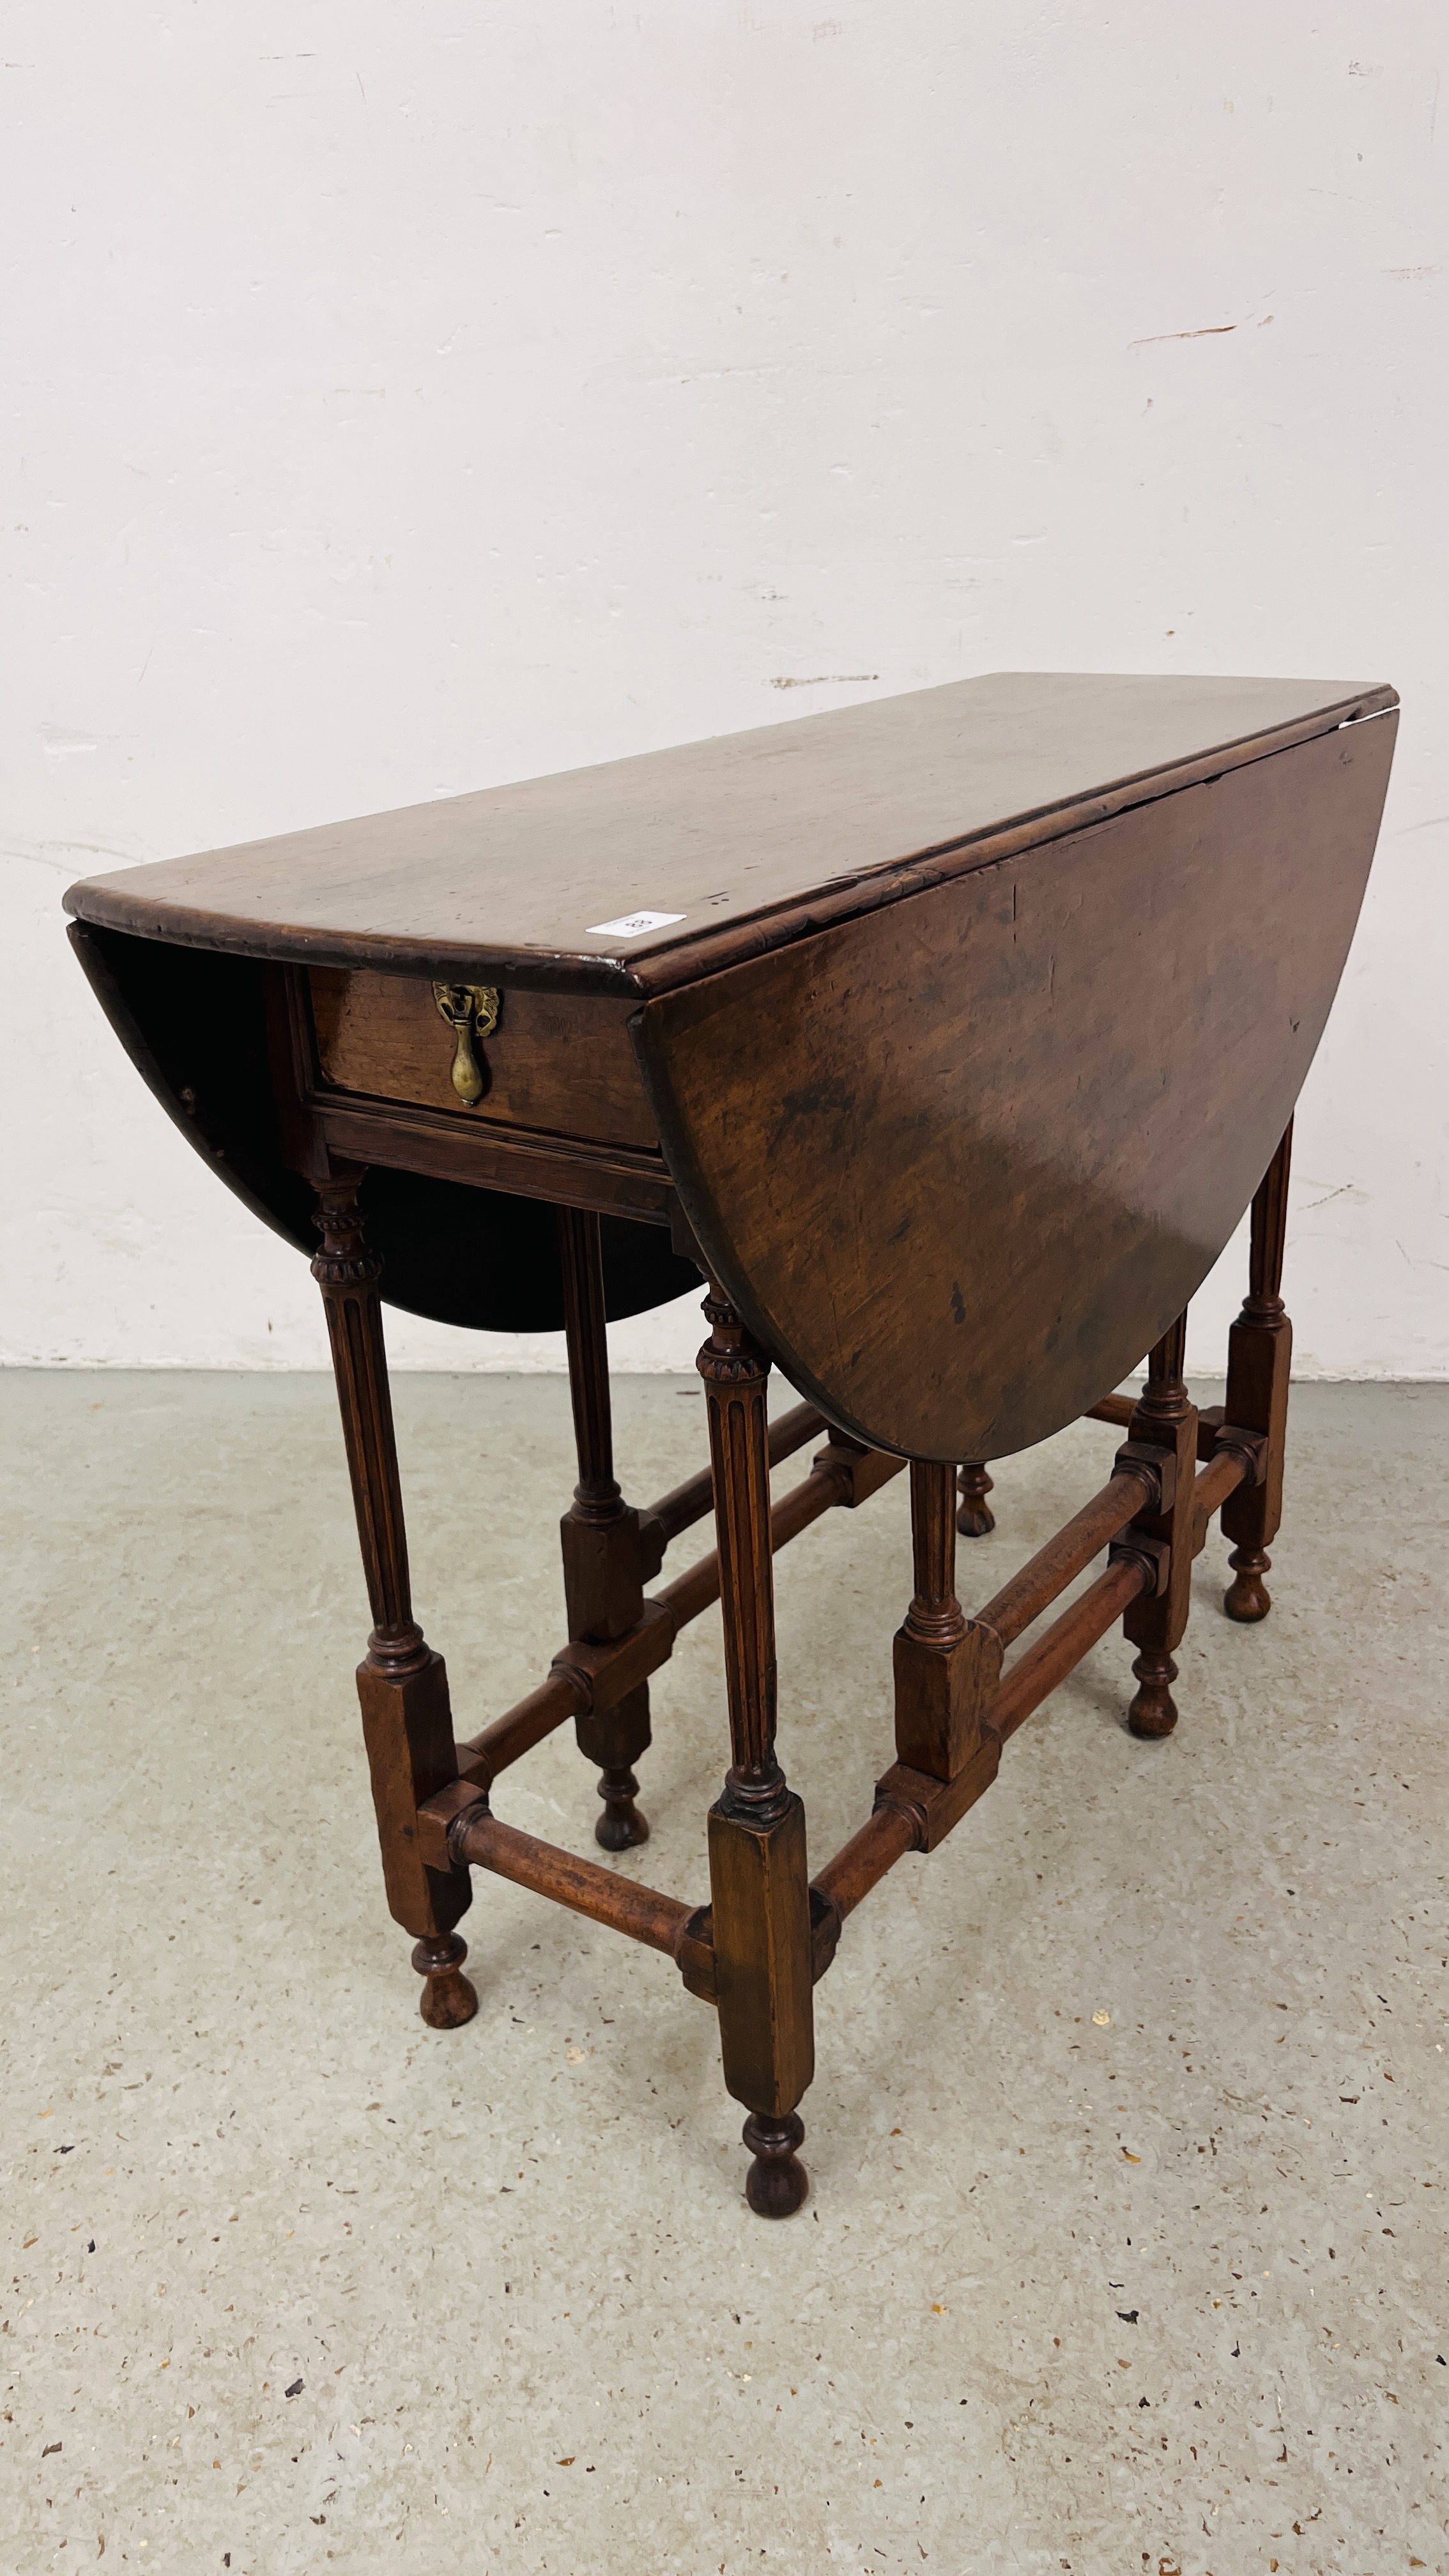 A MAHOGANY GATELEG TABLE, C18TH. AND LATER, EXTENDED 100CM.